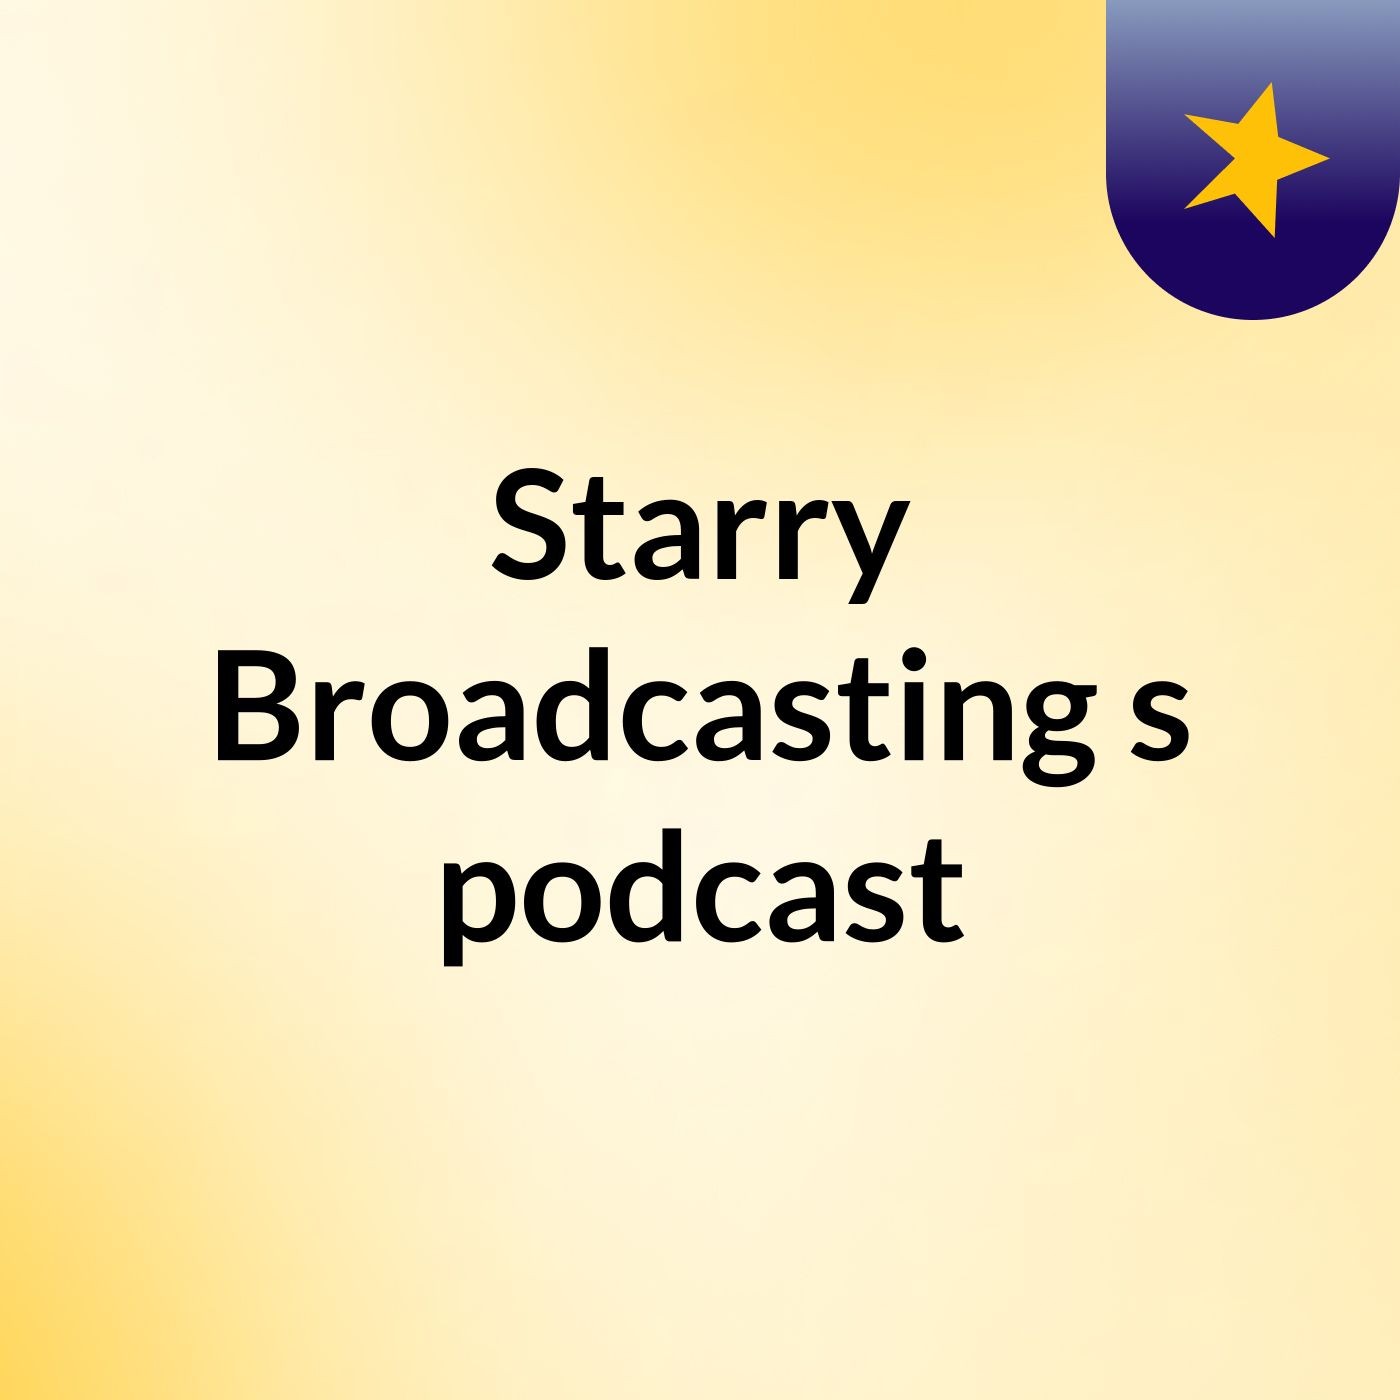 Episode 5 - Starry Broadcasting's podcast